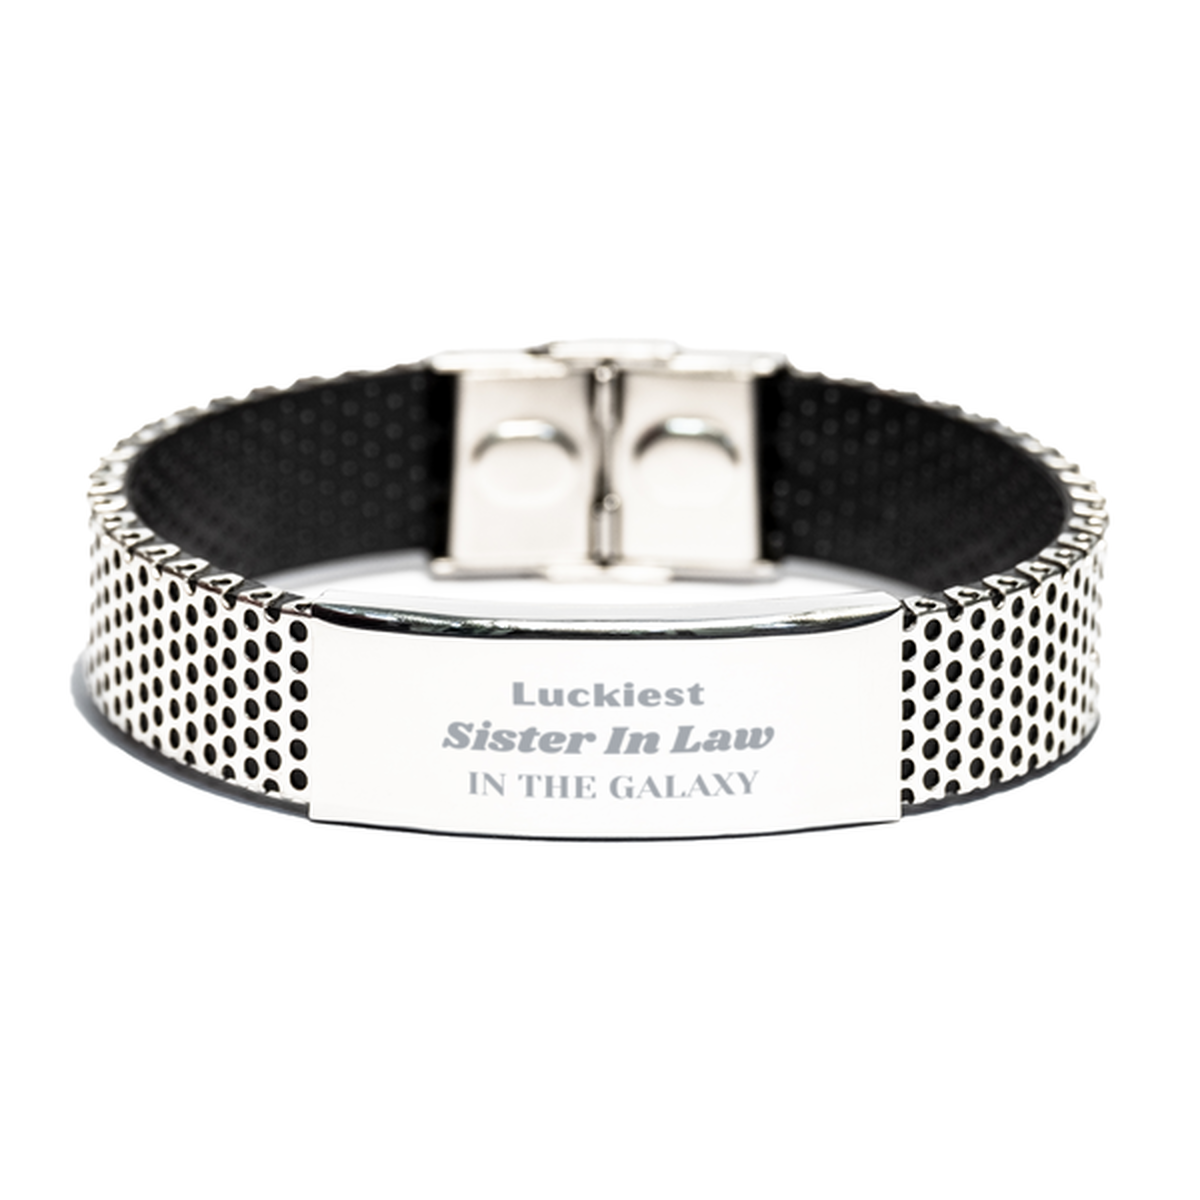 Luckiest Sister In Law in the Galaxy, To My Sister In Law Engraved Gifts, Christmas Sister In Law Stainless Steel Bracelet Gifts, X-mas Birthday Unique Gifts For Sister In Law Men Women